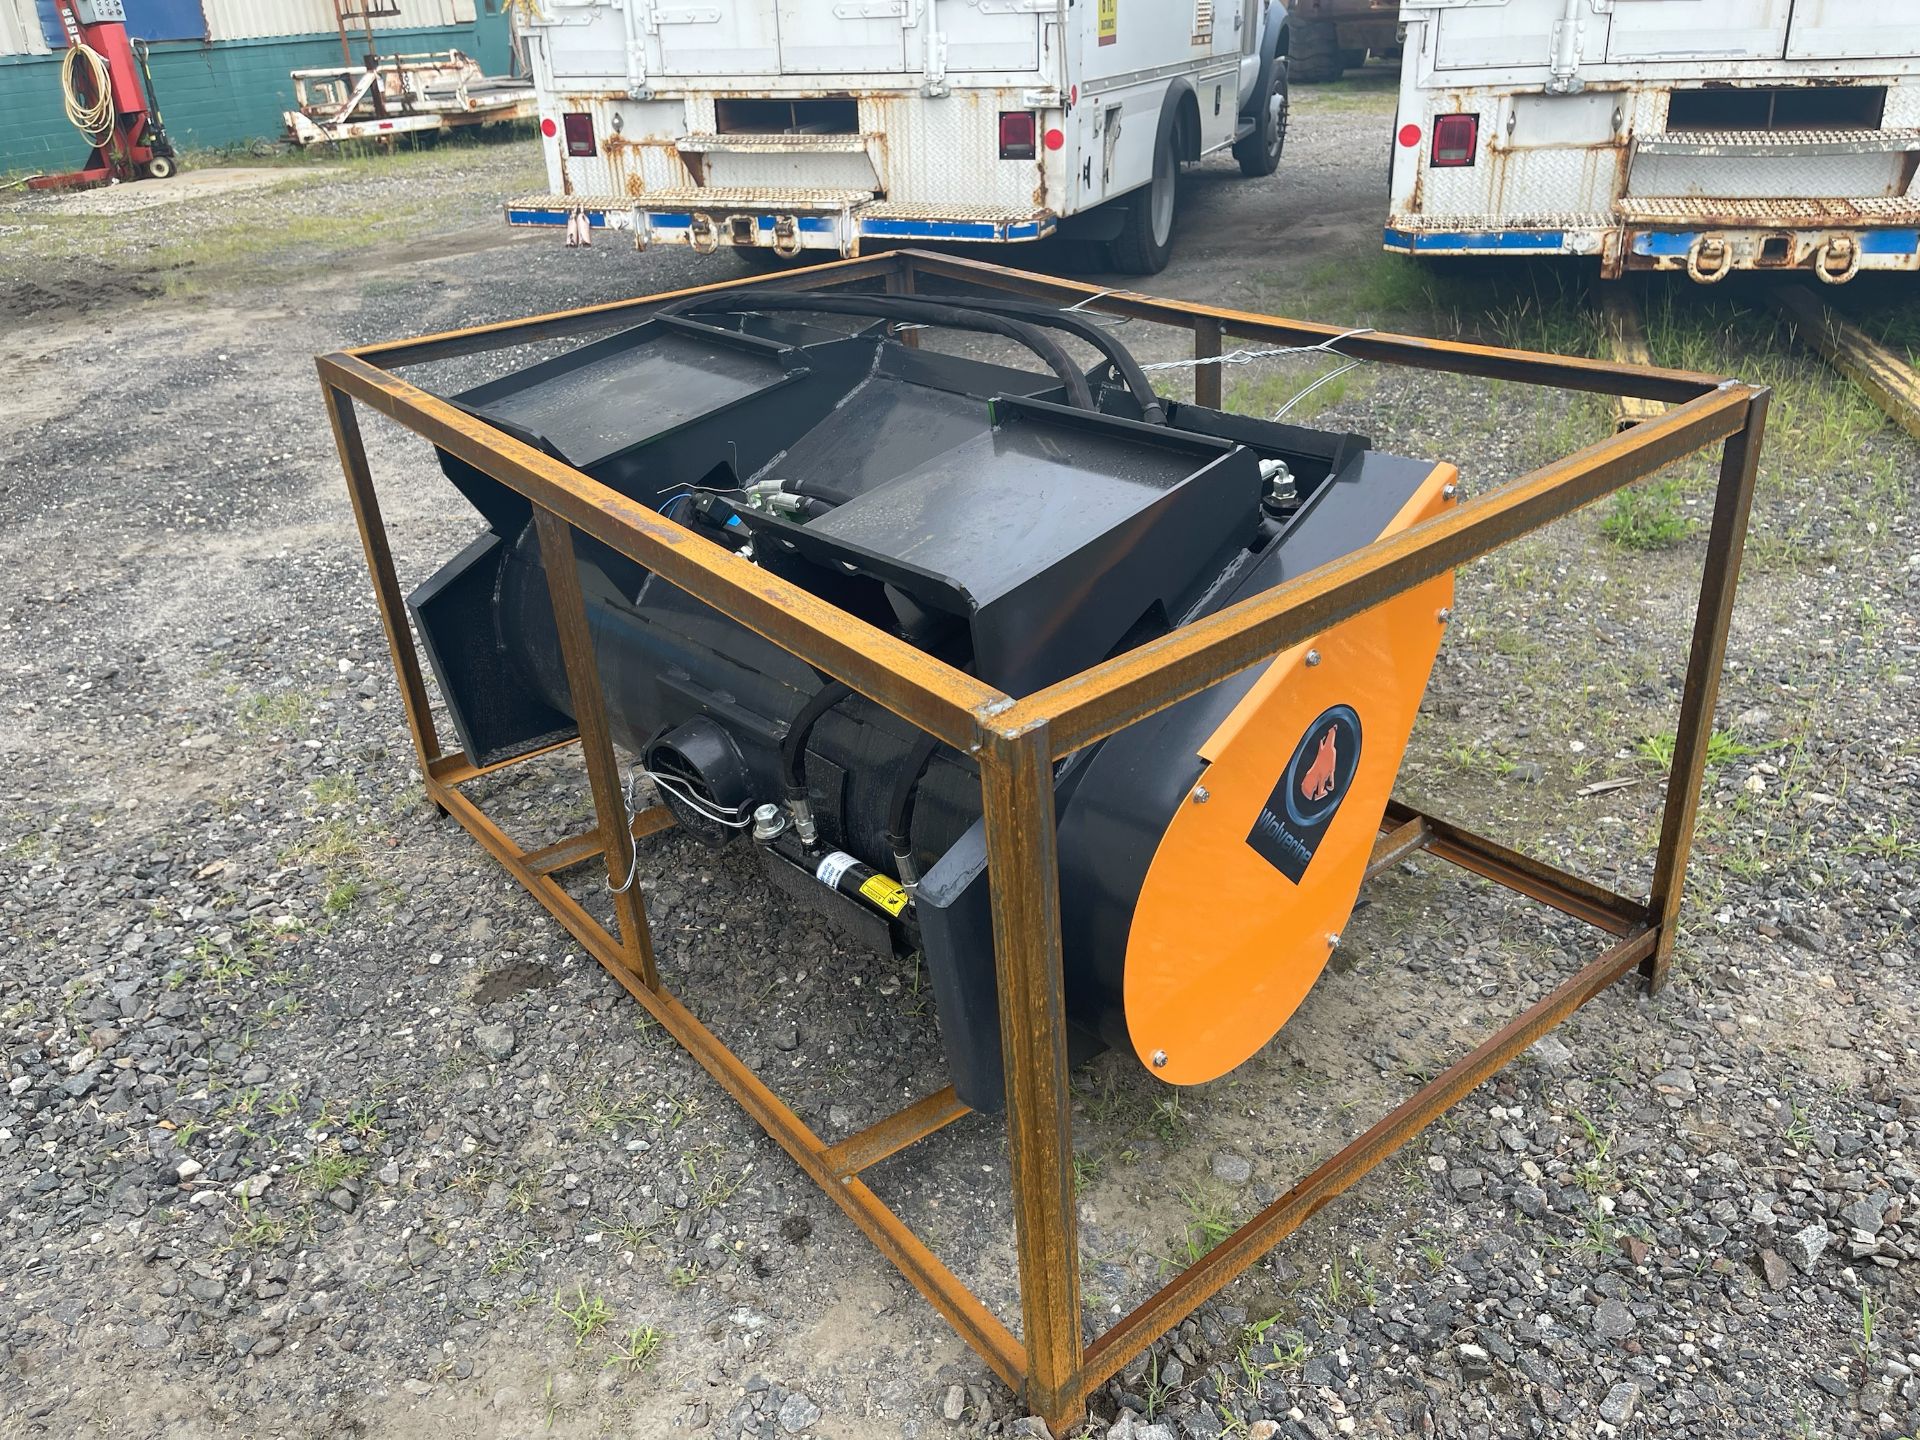 Wolverine Skid Steer Cement Mixing Attachment (r1)